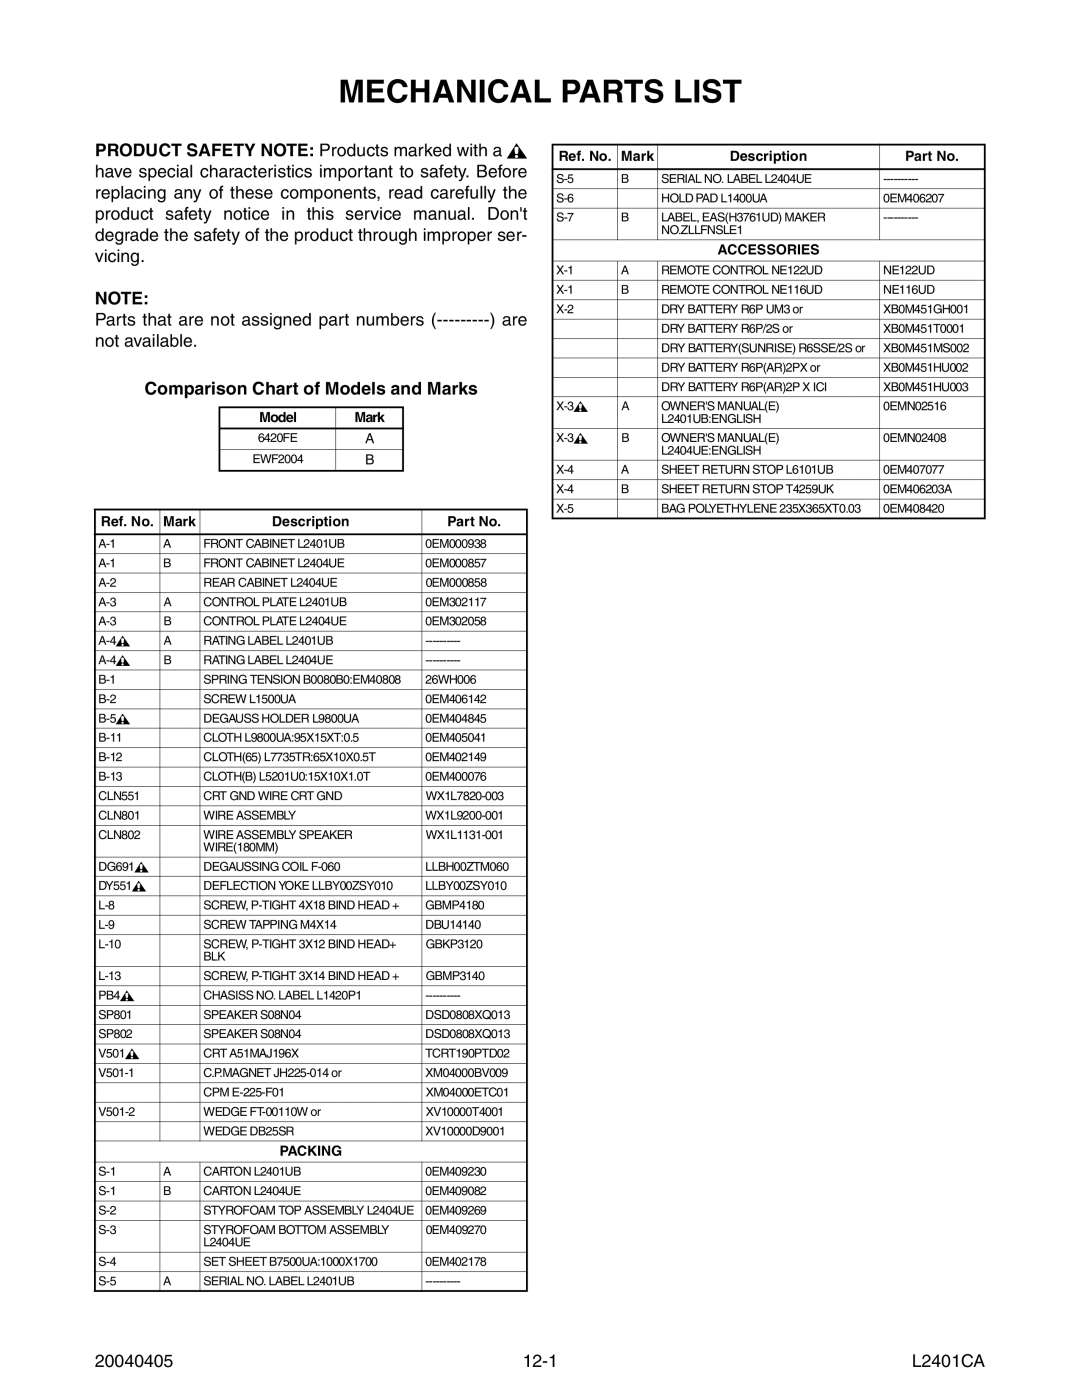 Emerson 6420FE service manual Mechanical Parts List, Comparison Chart of Models and Marks, 20040405 12-1 L2401CA 